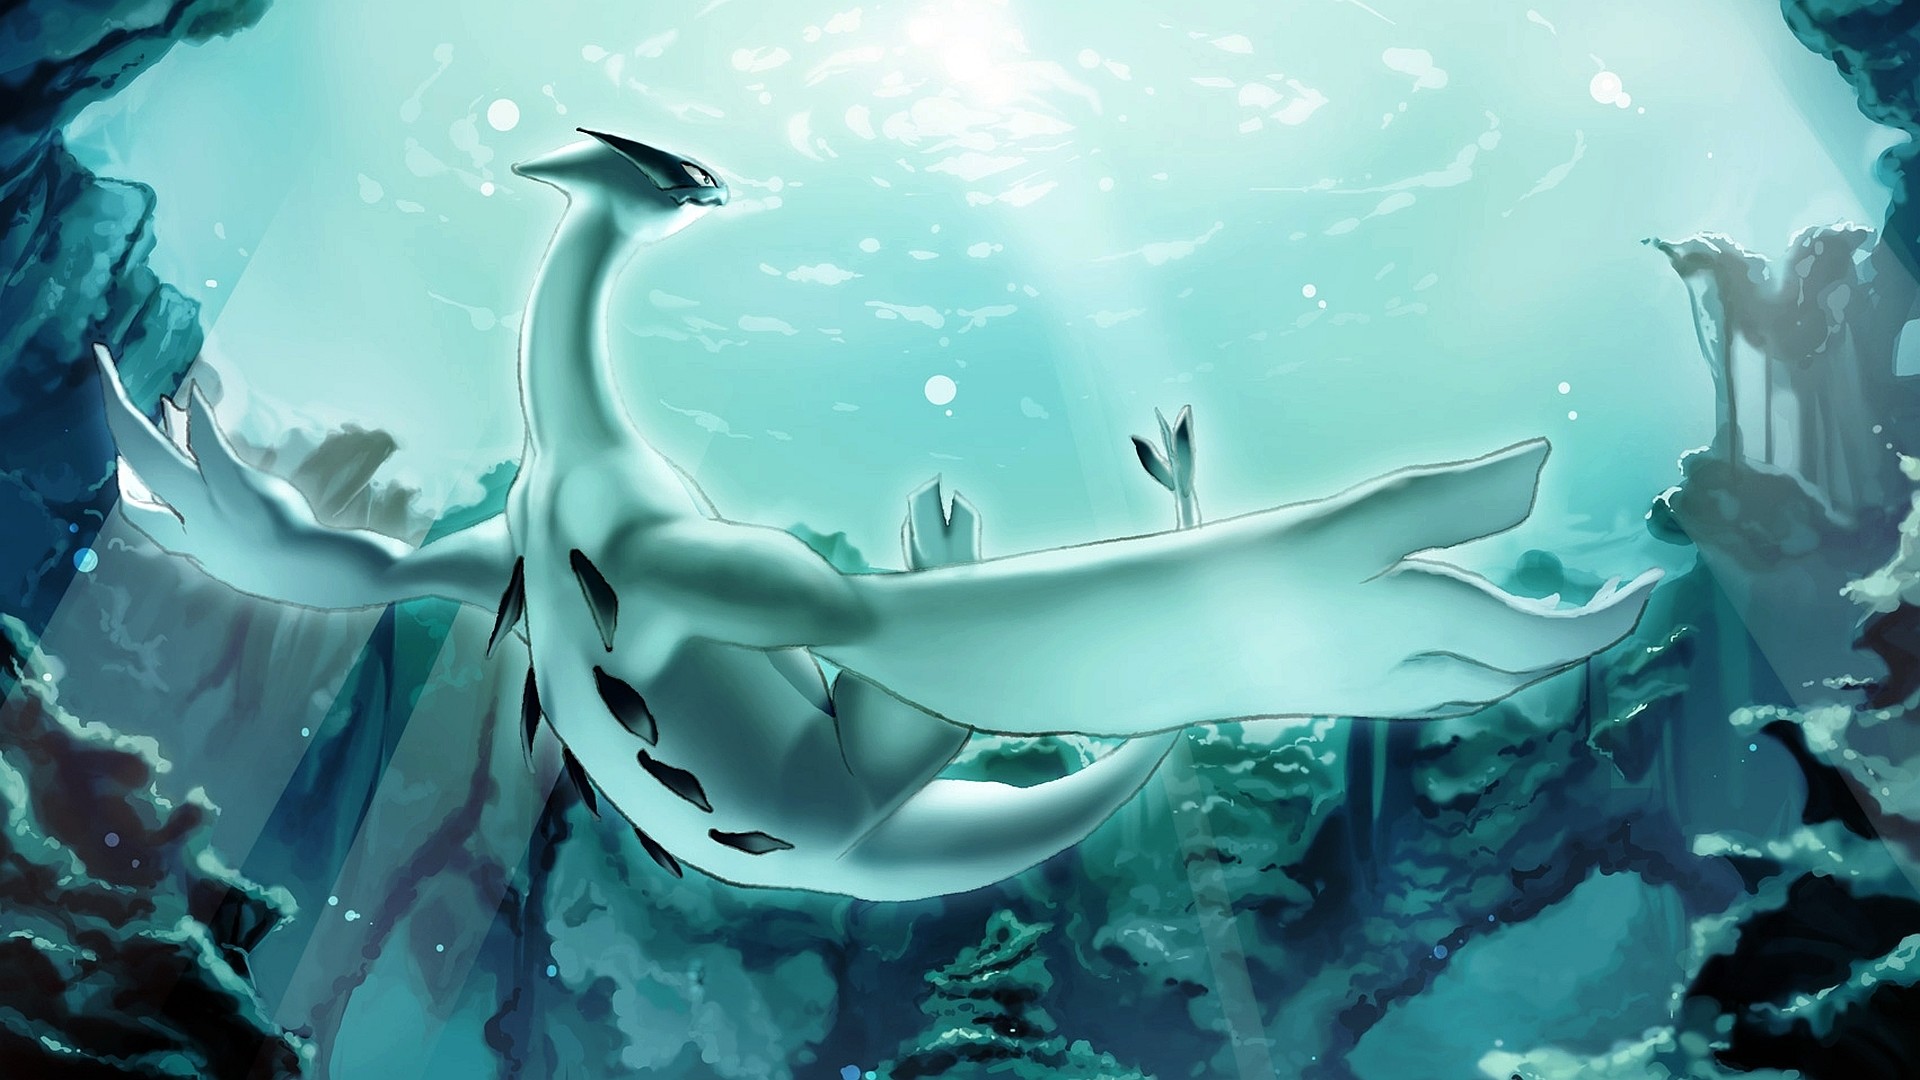 1920x1080 Search Results for “lugia pokemon wallpaper” – Adorable Wallpapers